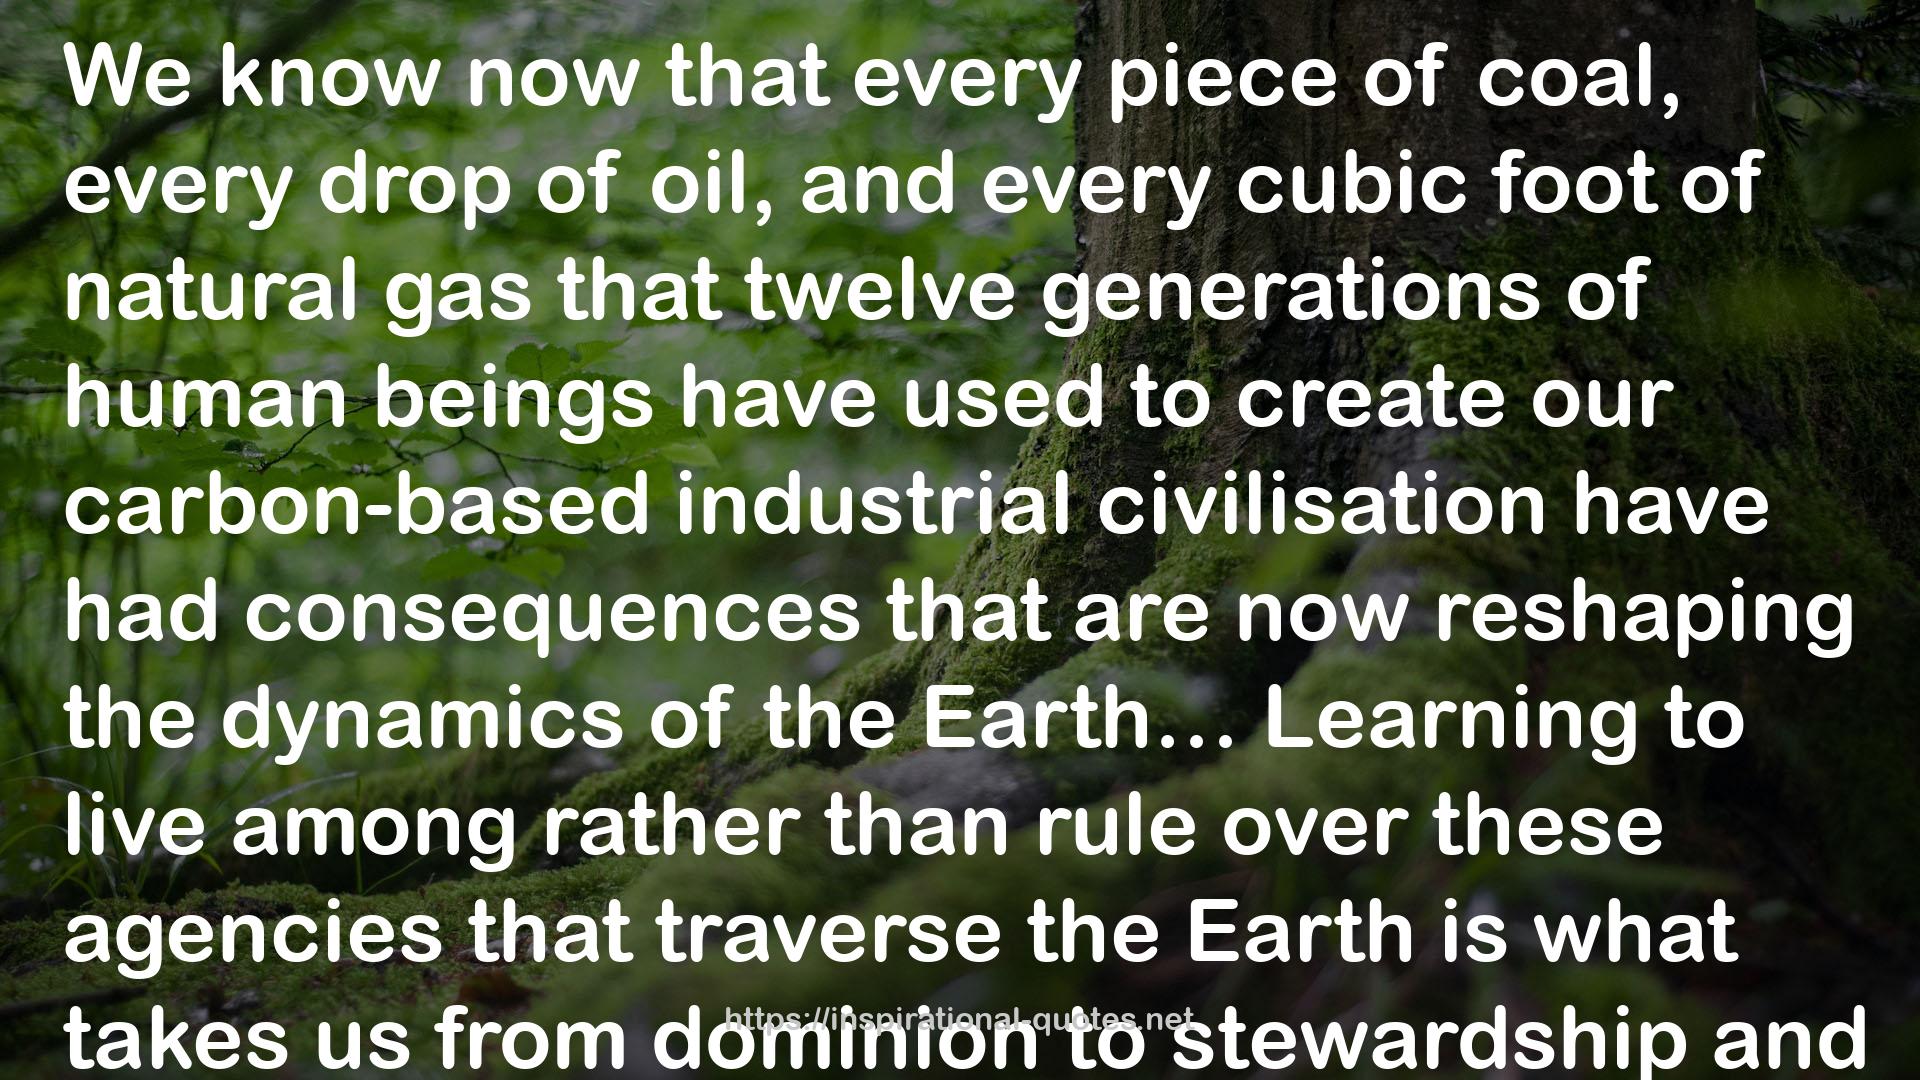 The Green New Deal: Why the Fossil Fuel Civilization Will Collapse by 2028, and the Bold Economic Plan to Save Life on Earth QUOTES